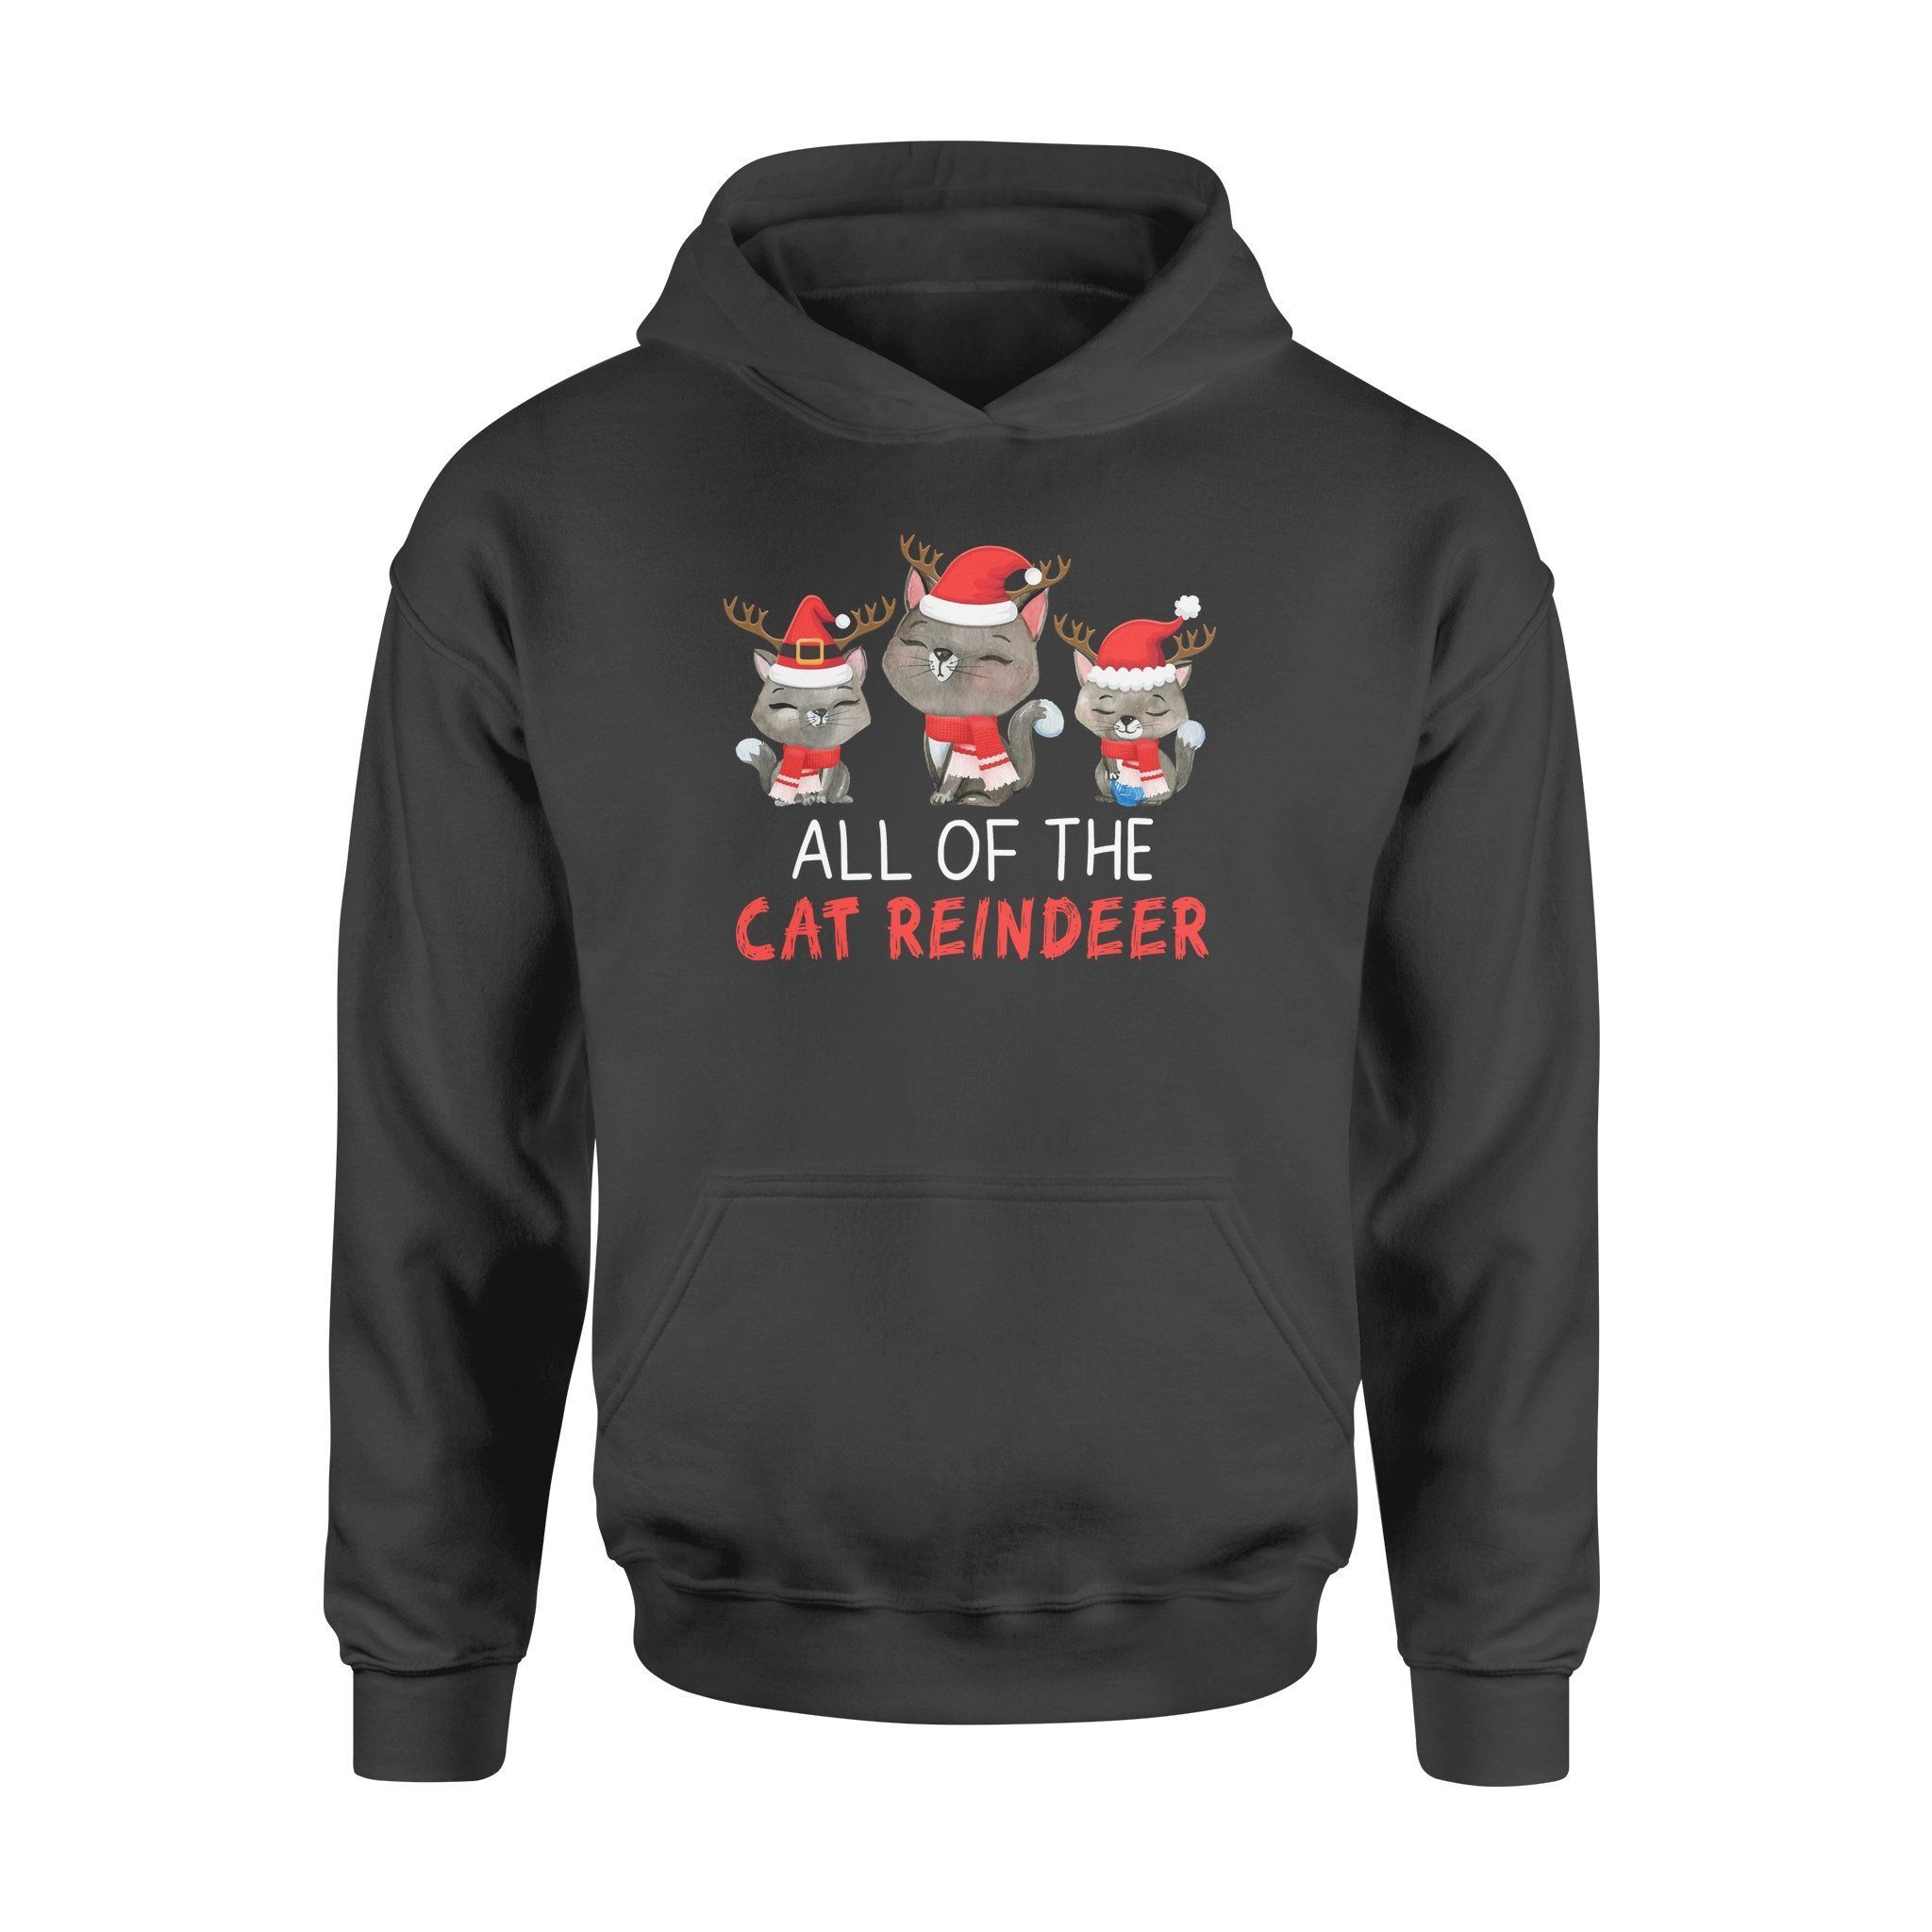 Besteever All Of The Cat Reindeer Shirt Gift For Couple, Friend, Family � Standard 3D Hoodie For Men Women All Over 3D Printed Hoodie